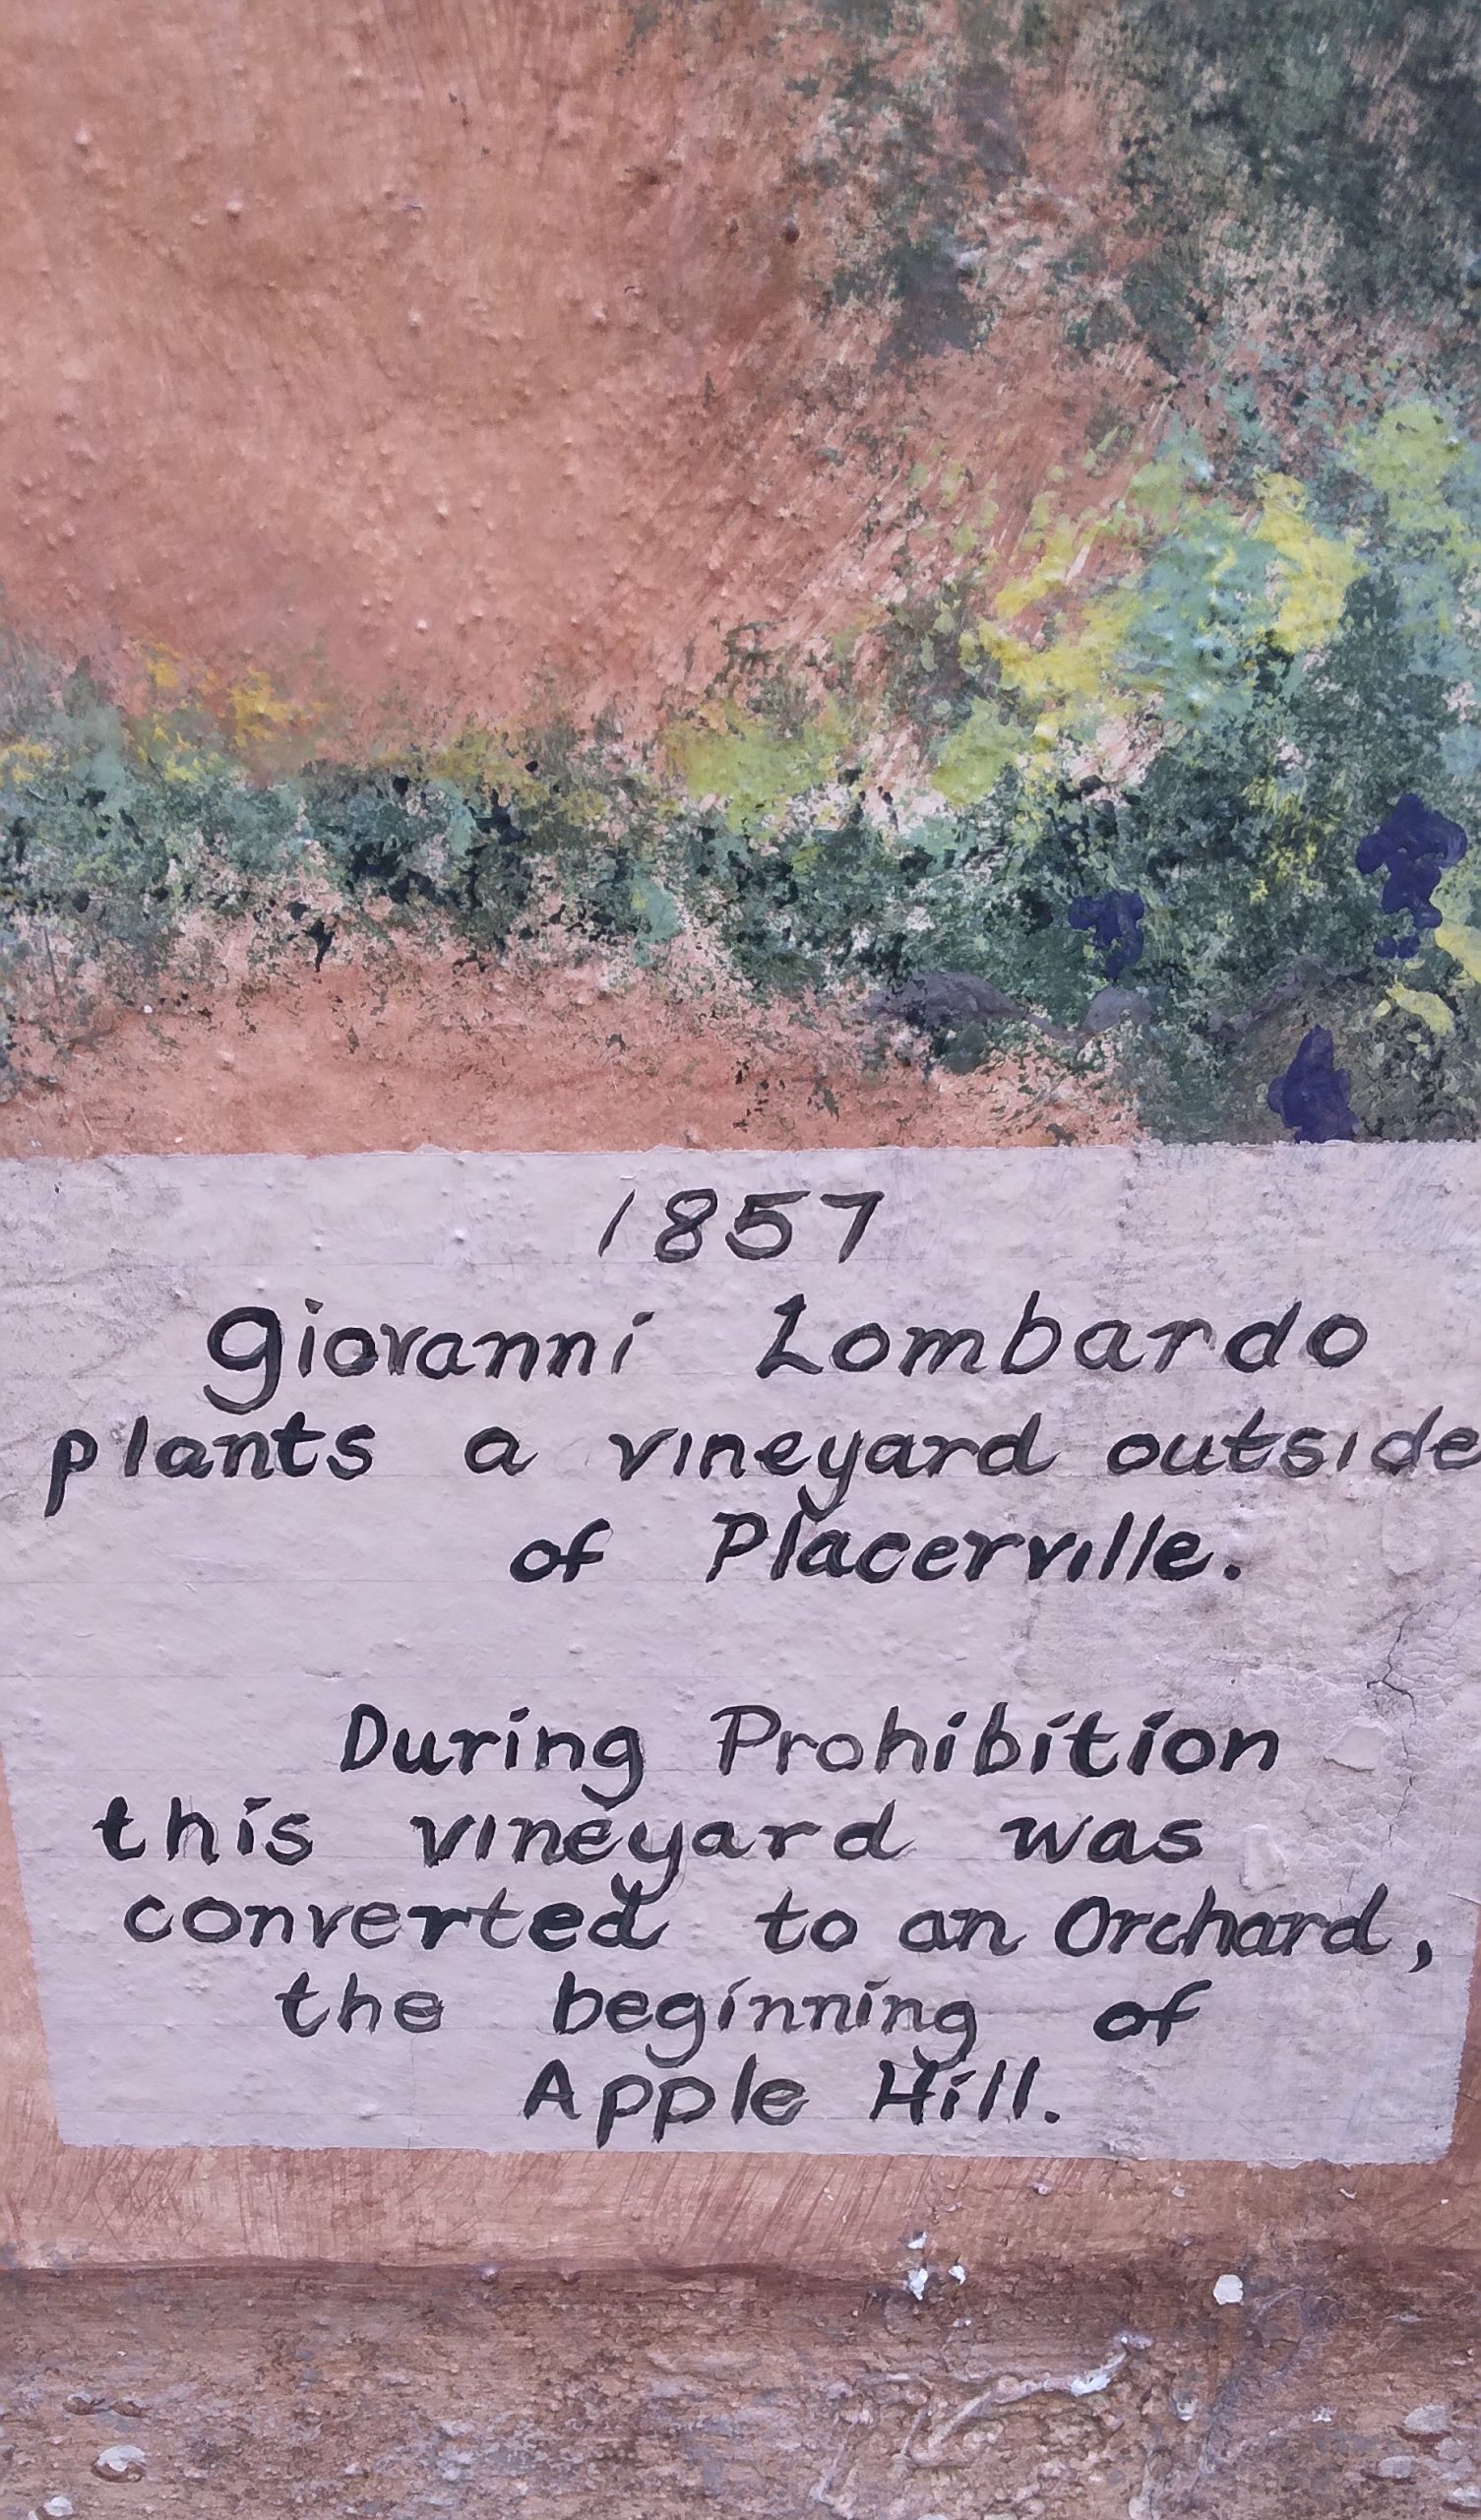 Rock painted with text that reads "1857 Gioranni Lombardo plants a vineyard outside Placerville."